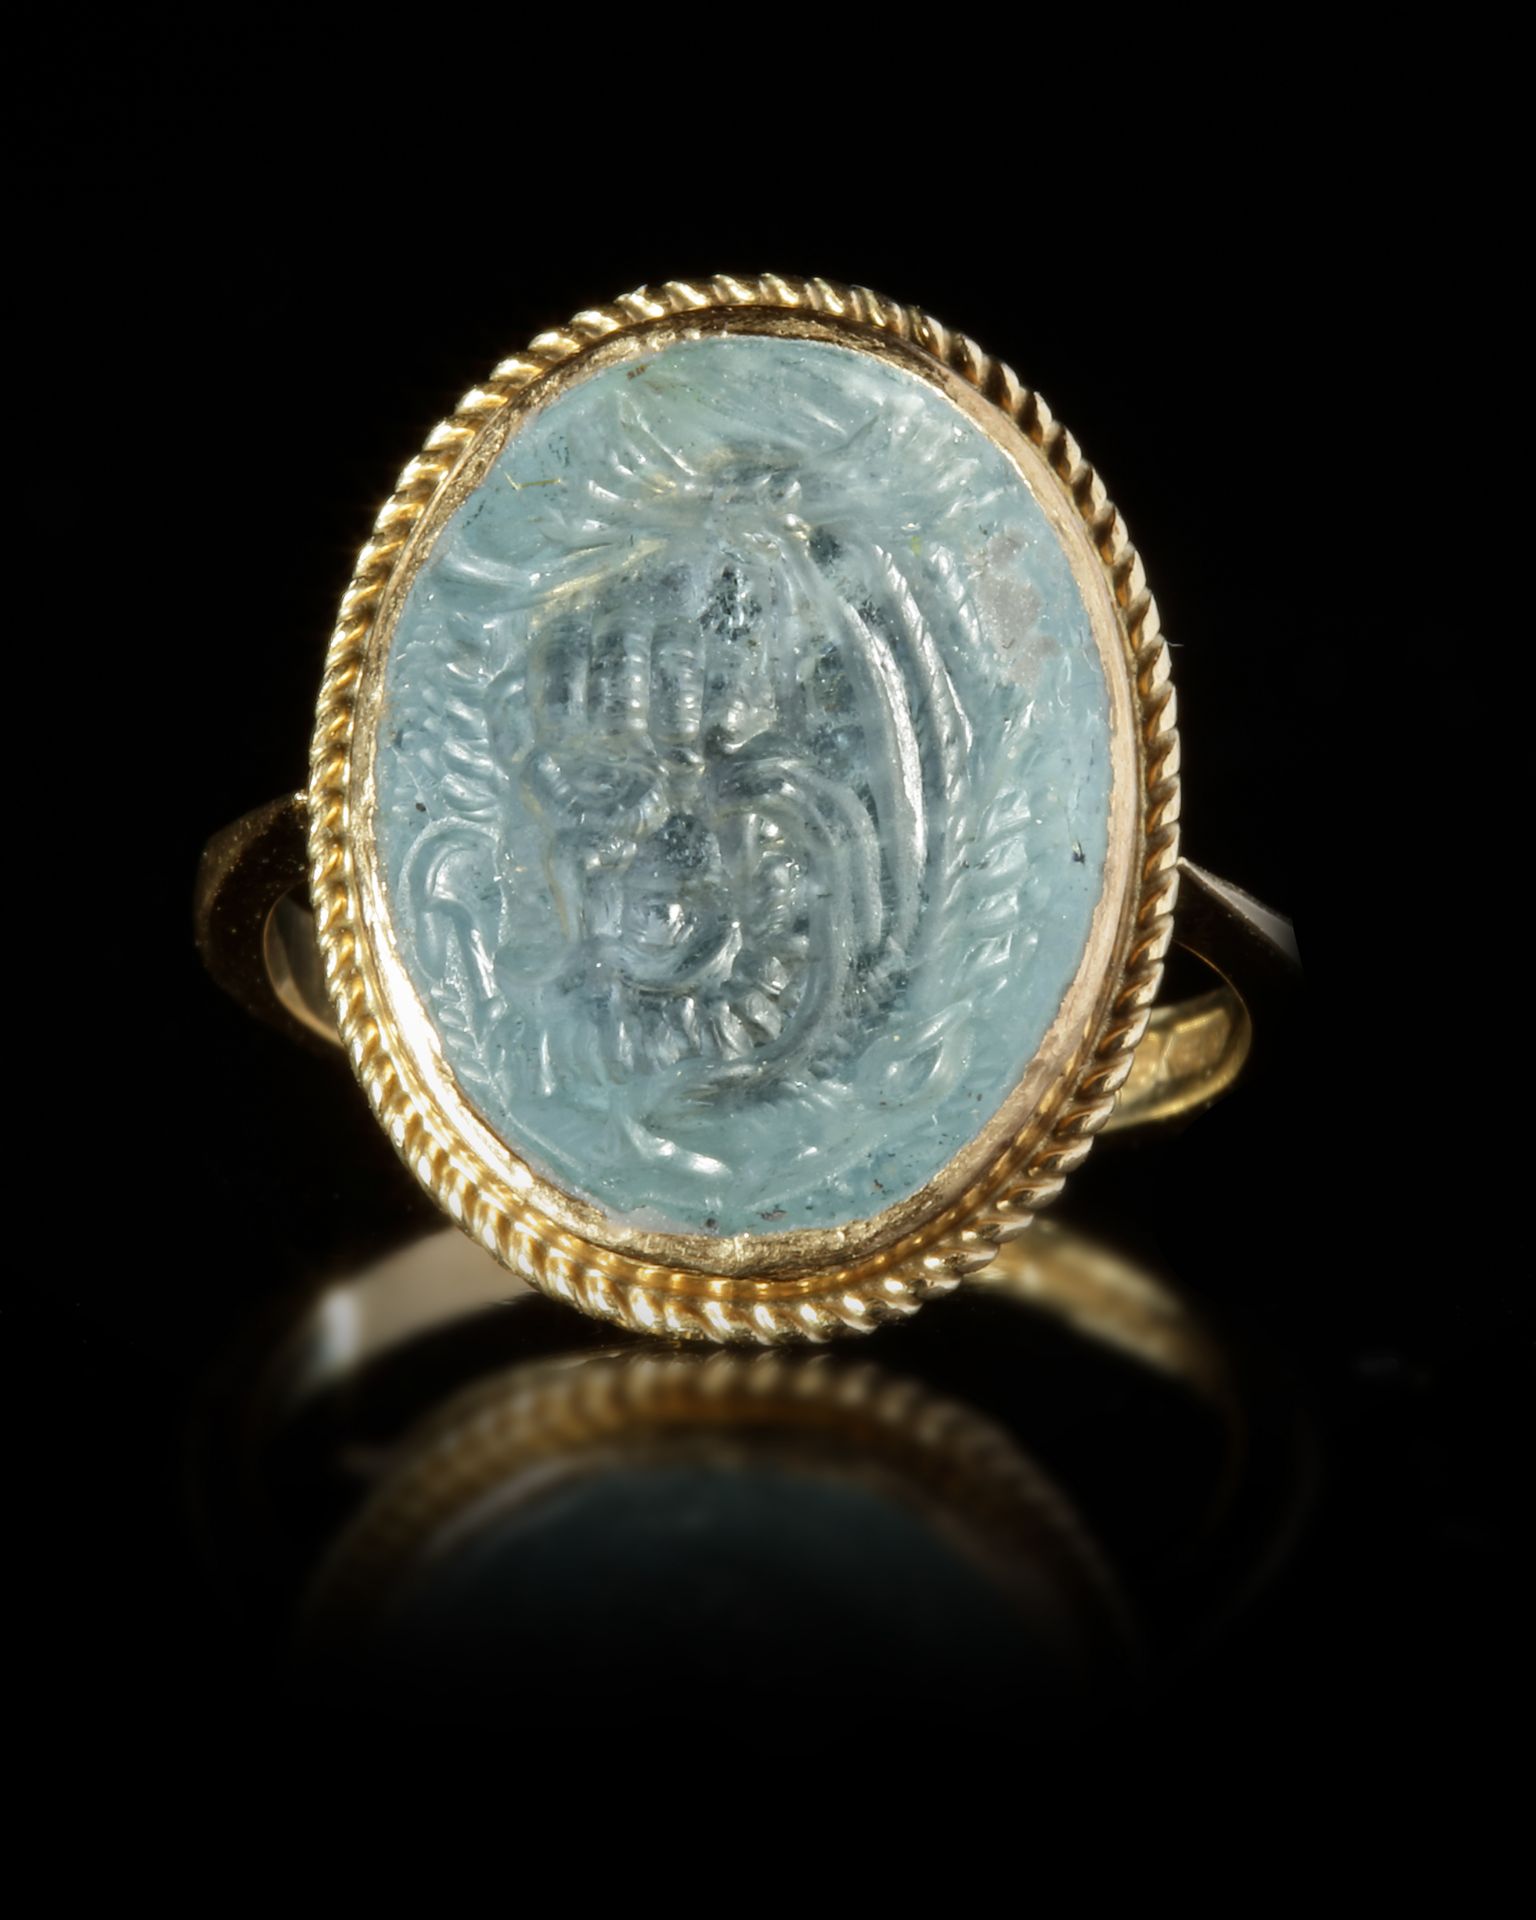 A BEAUTIFUL INTAGLIO IN AQUAMARINE OF A BUST OF HERCULES, 1ST CENTURY AD - Image 4 of 5